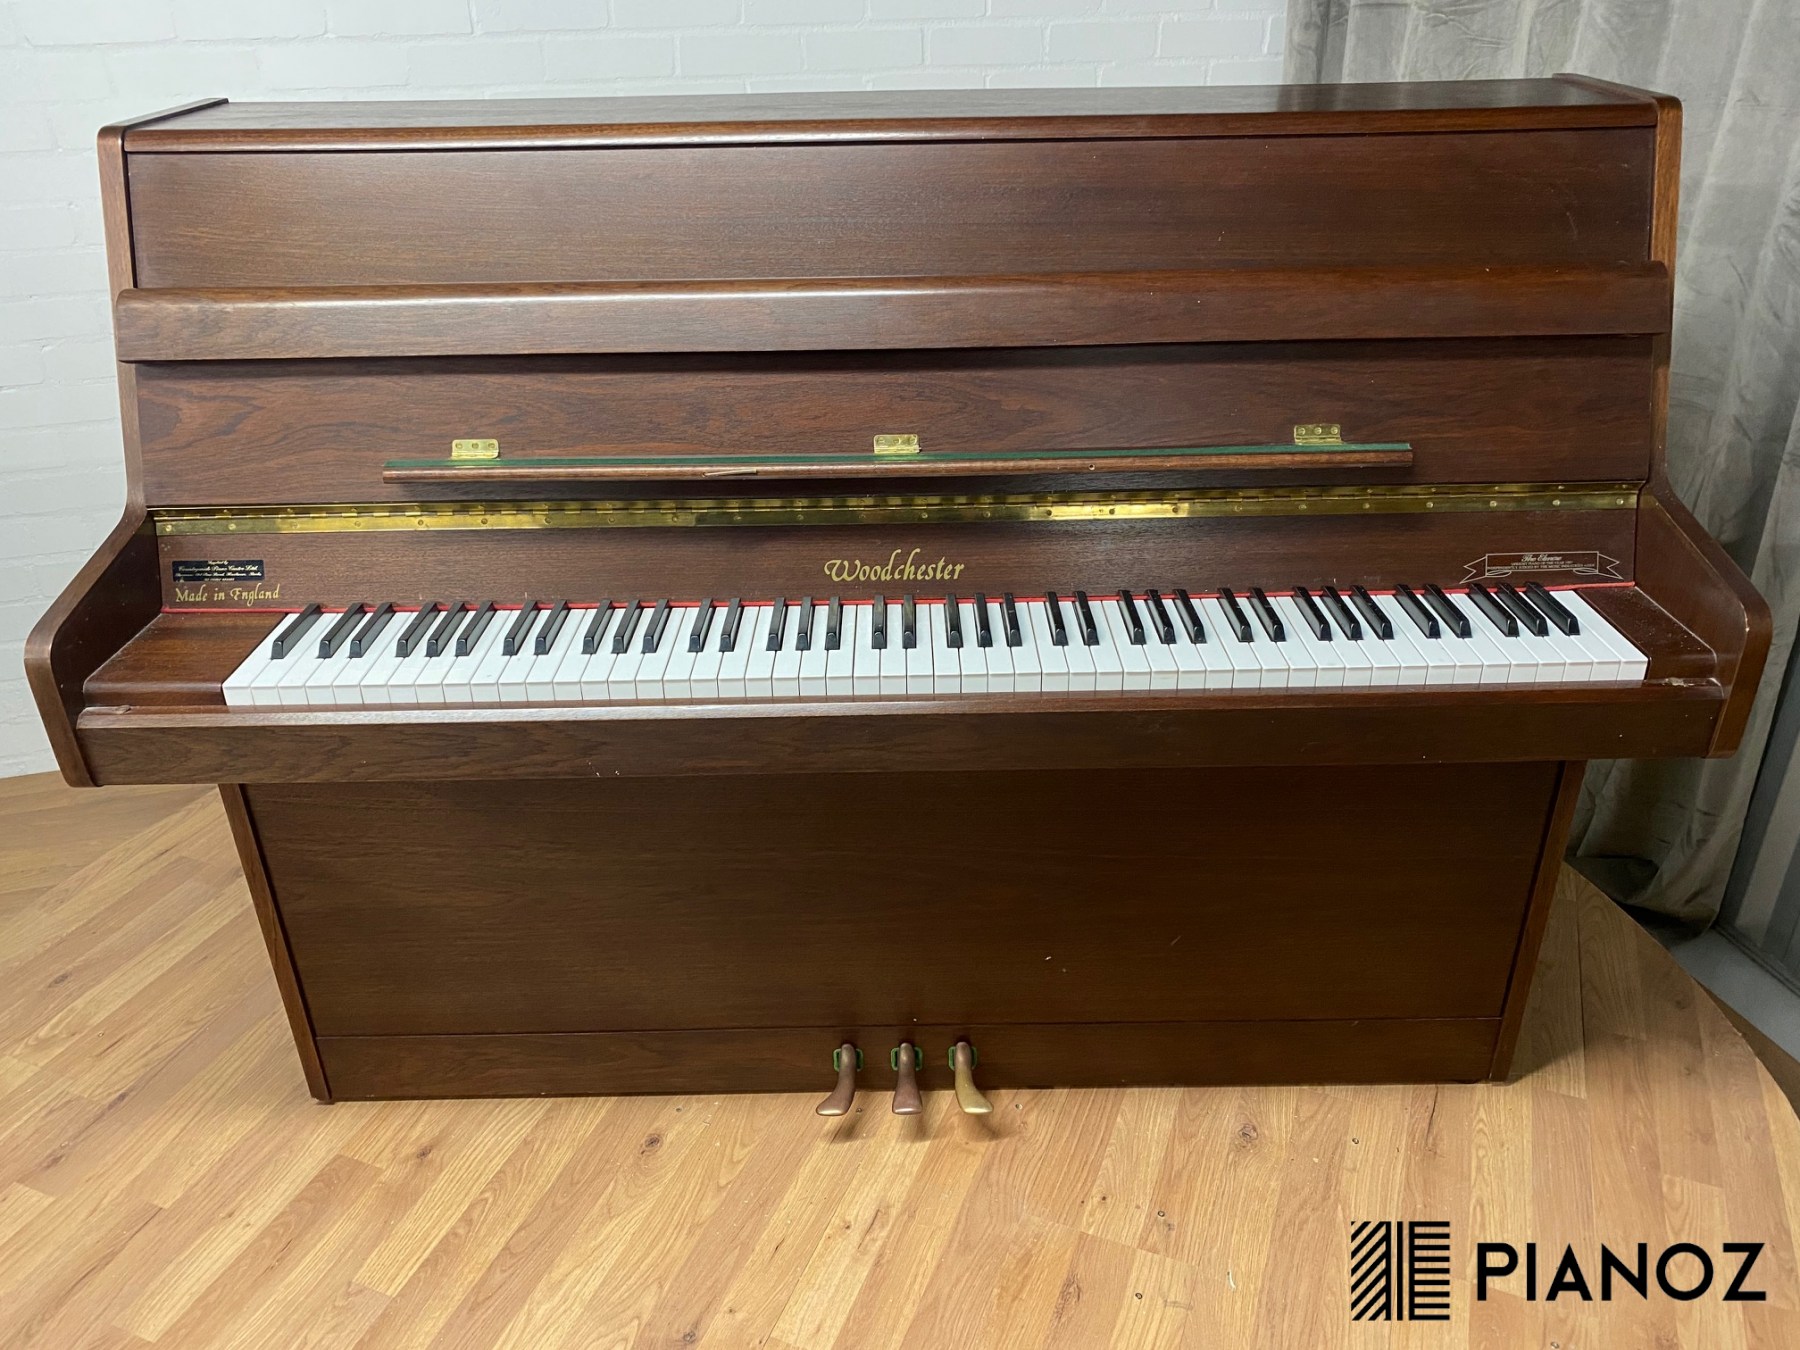 Woodchester Elmore Upright Piano piano for sale in UK